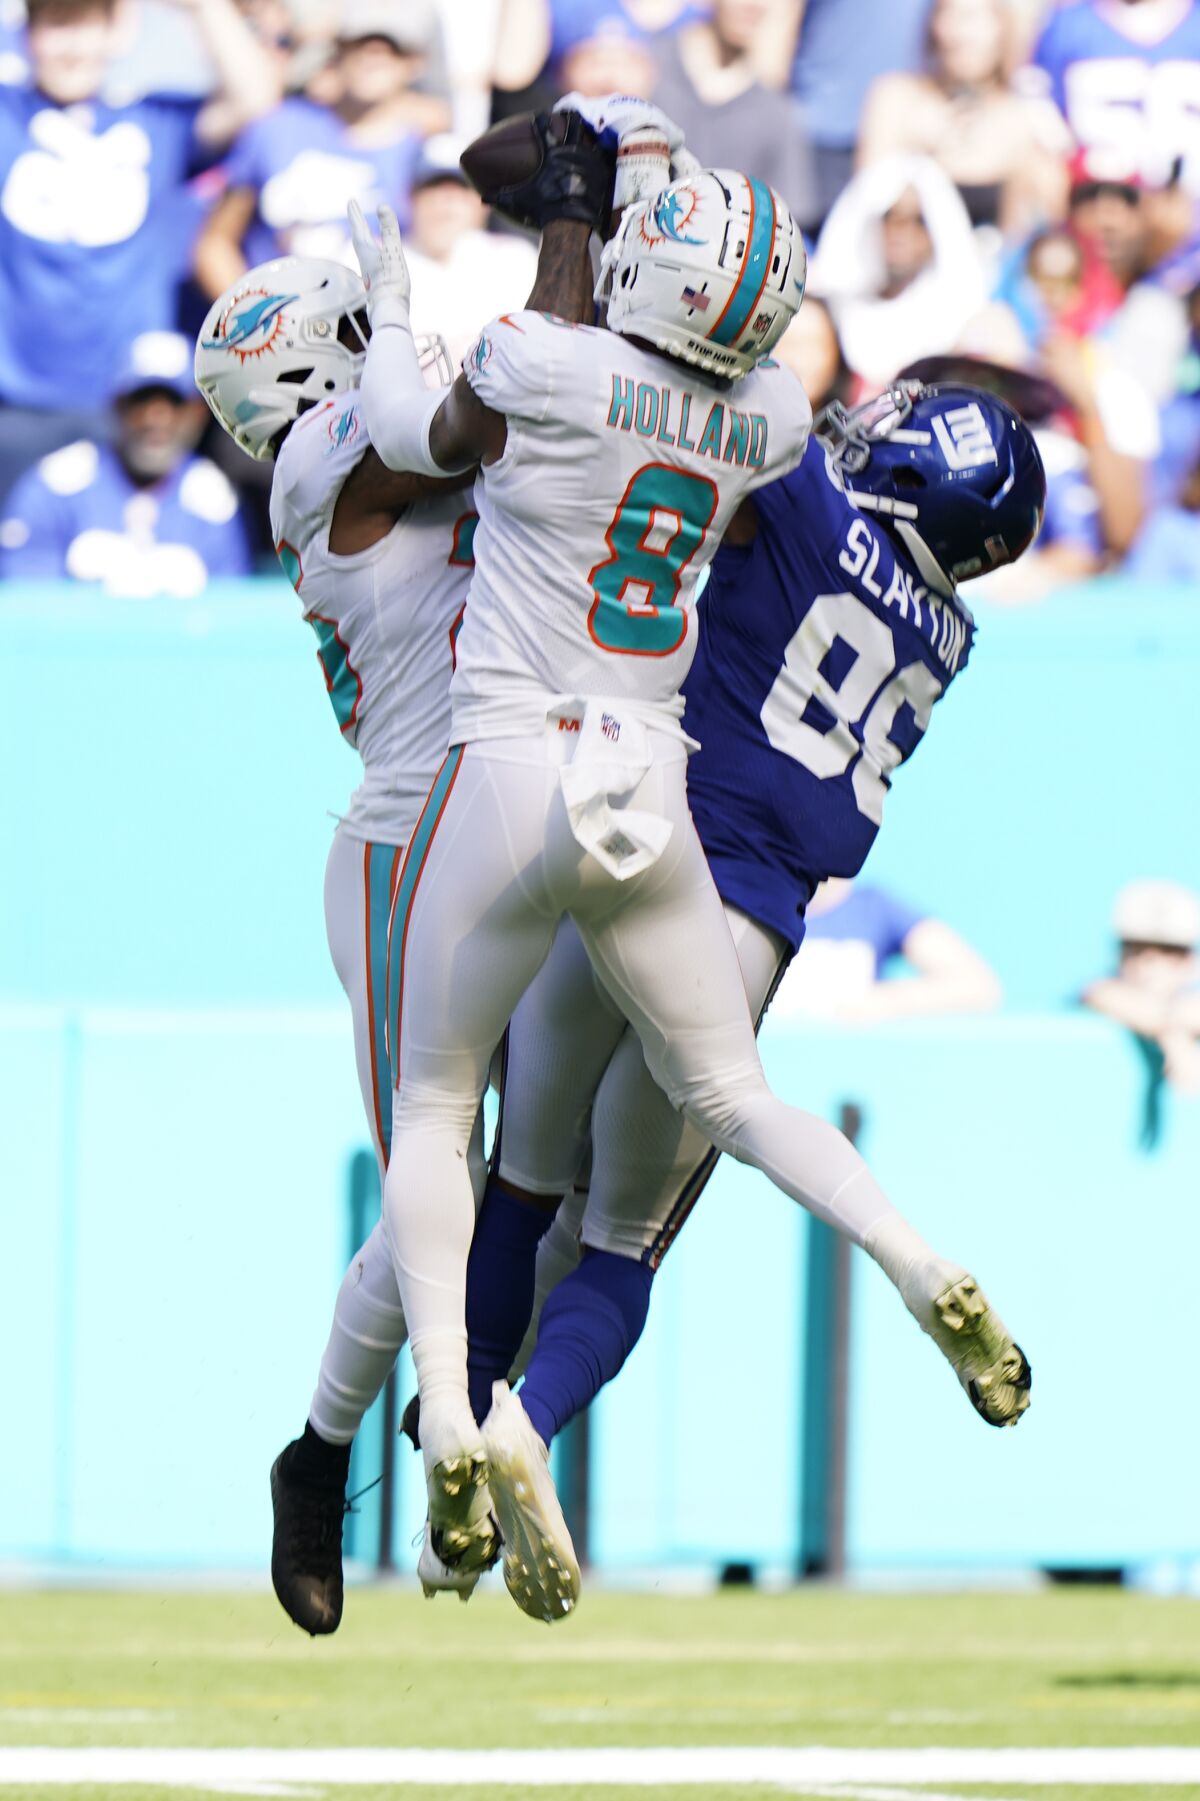 Miami Dolphins cornerback Xavien Howard (25) catches a pass intended for New York Giants tight end Evan Engram (88) near the end zone during the first half of an NFL football game, Sunday, Dec. 5, 2021, in Miami Gardens, Fla. Miami Dolphins free safety Jevon Holland (8) is center. (AP Photo/Wilfredo Lee)